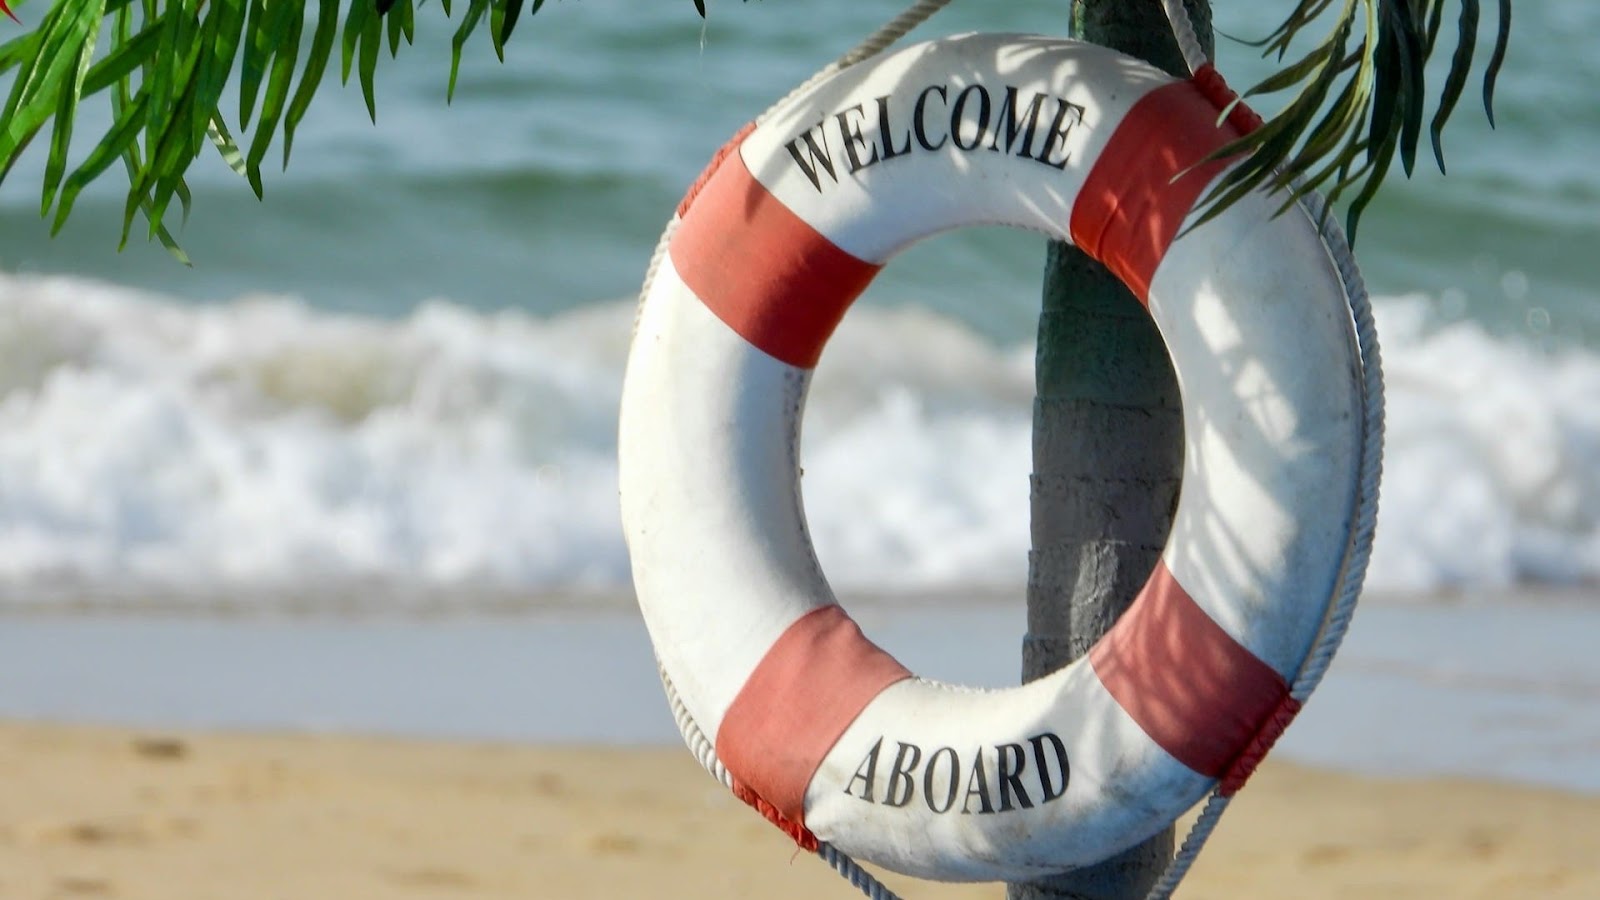 An image of a lifebuoy at the beach